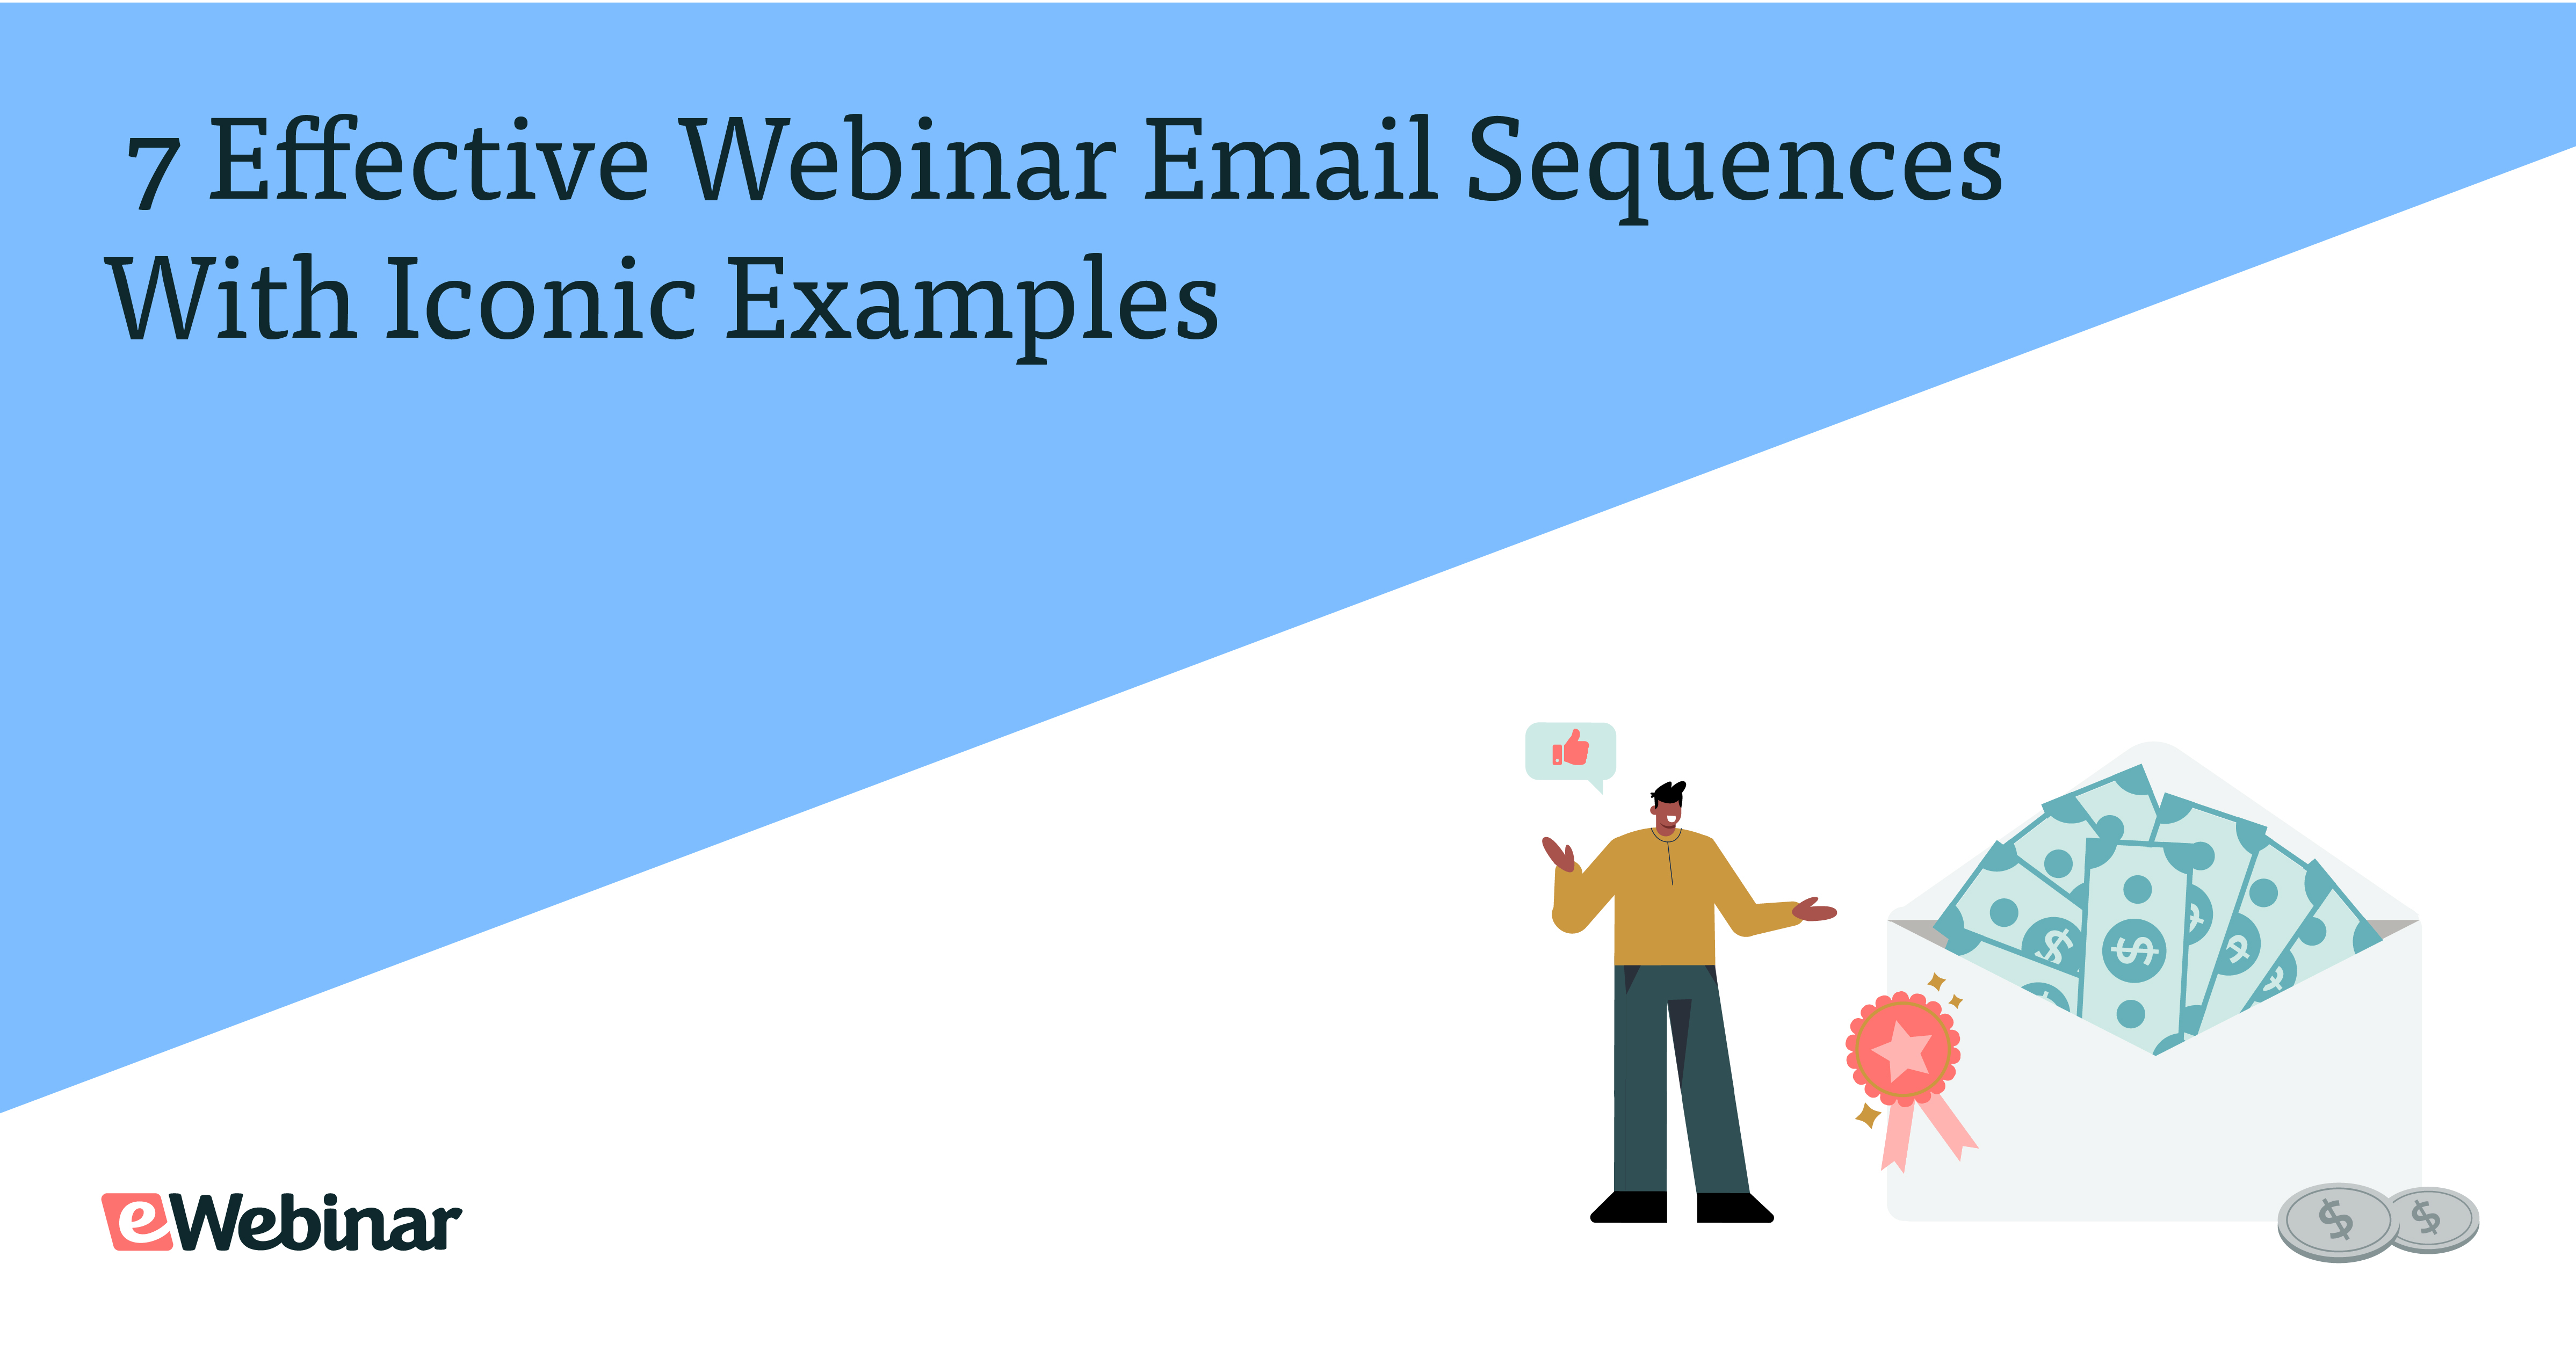 7 Effective Webinar Email Sequences with Iconic Examples